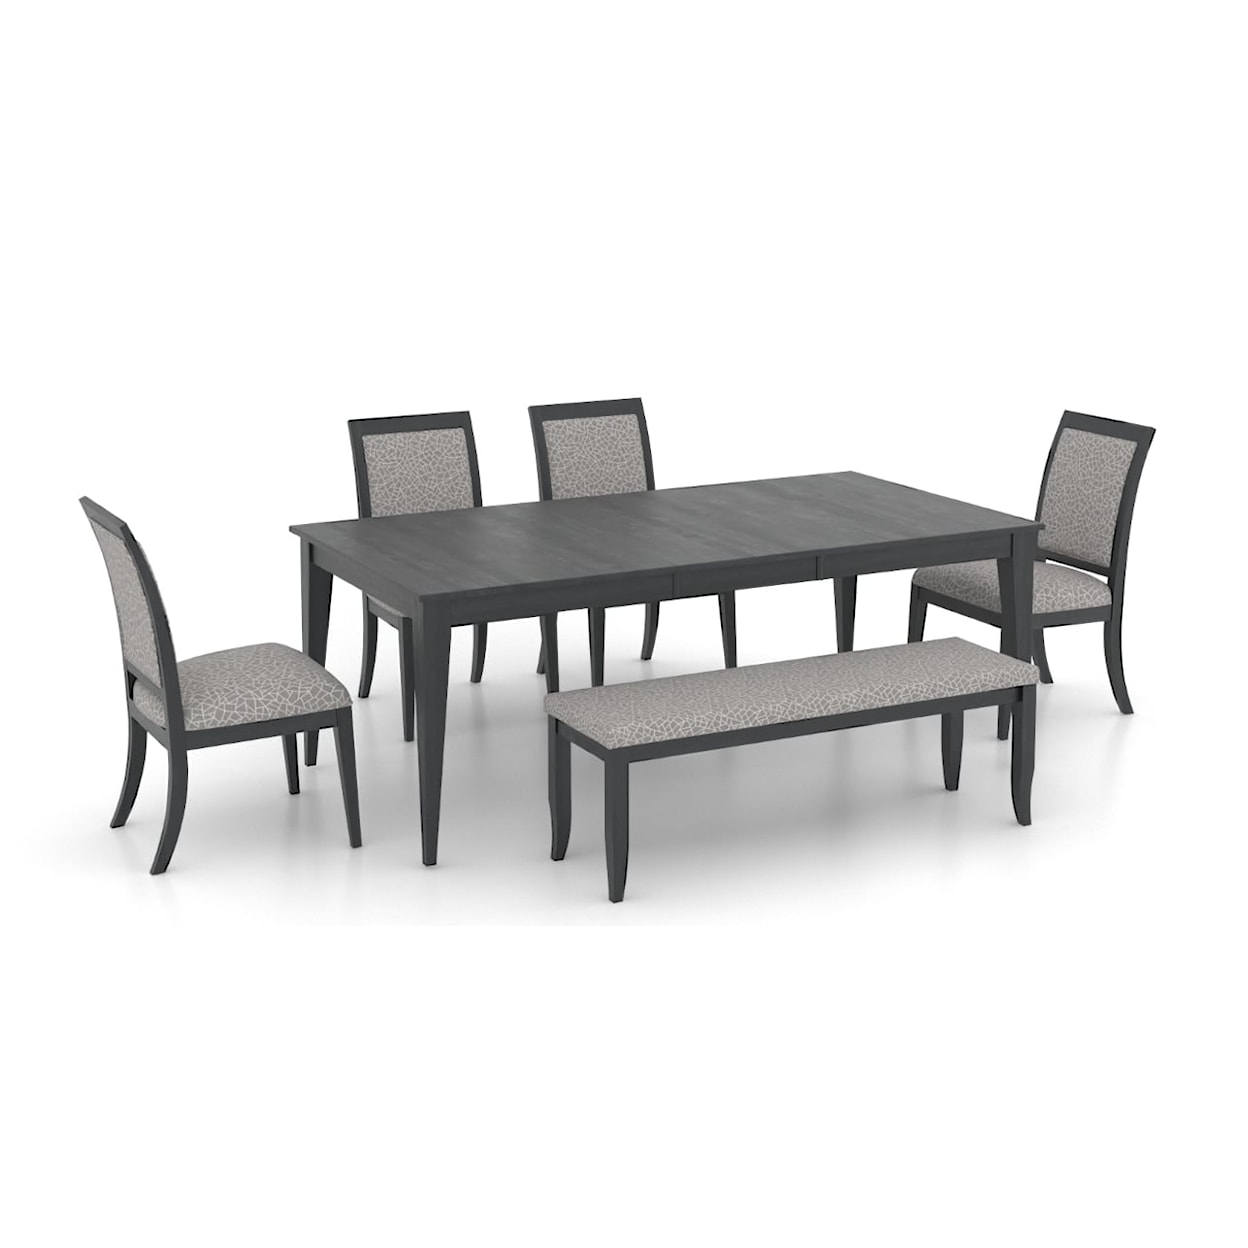 Canadel Dining Sets Six Piece Dining Set